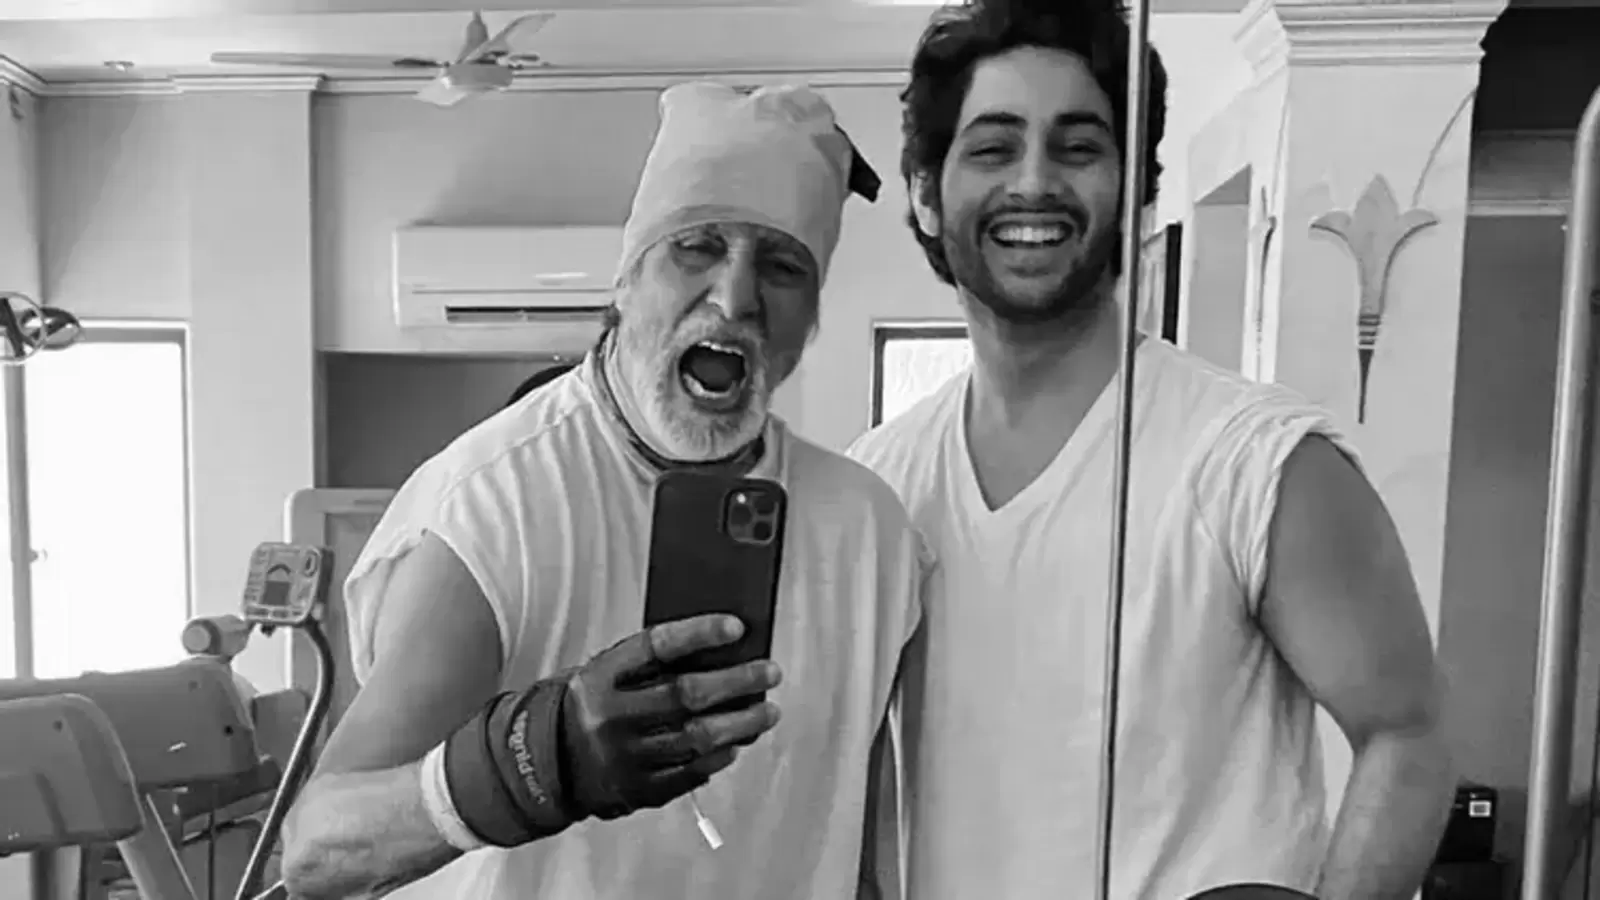 Amitabh Bachchan ends all secrecy around Agastya Nanda’s debut with The Archies, confirms it on Twitter